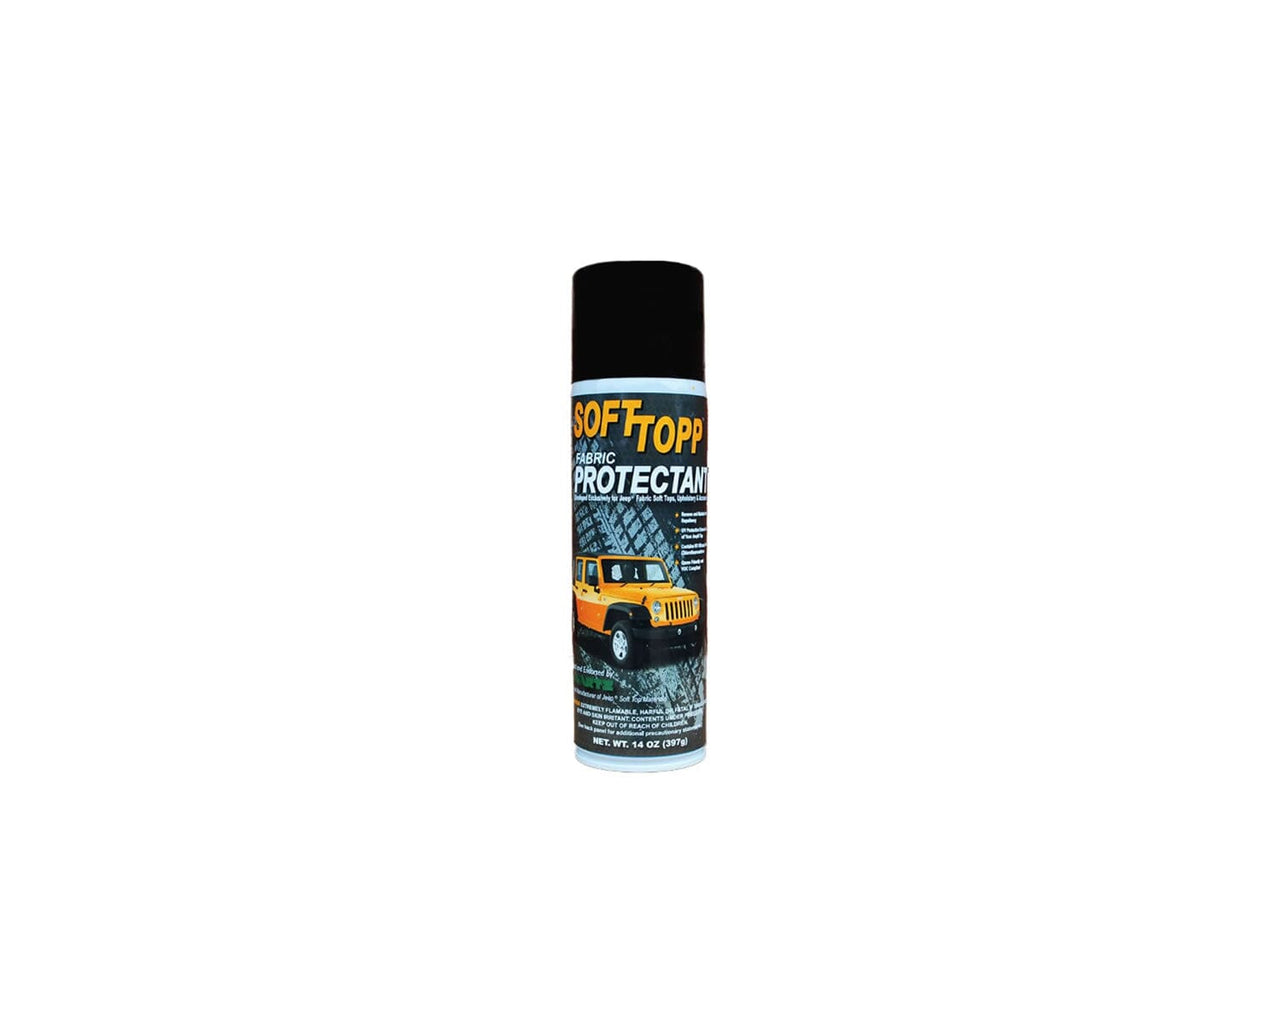 FABRIC SOFT TOP PROTECTANT Fabric Cleaner and Protectant 